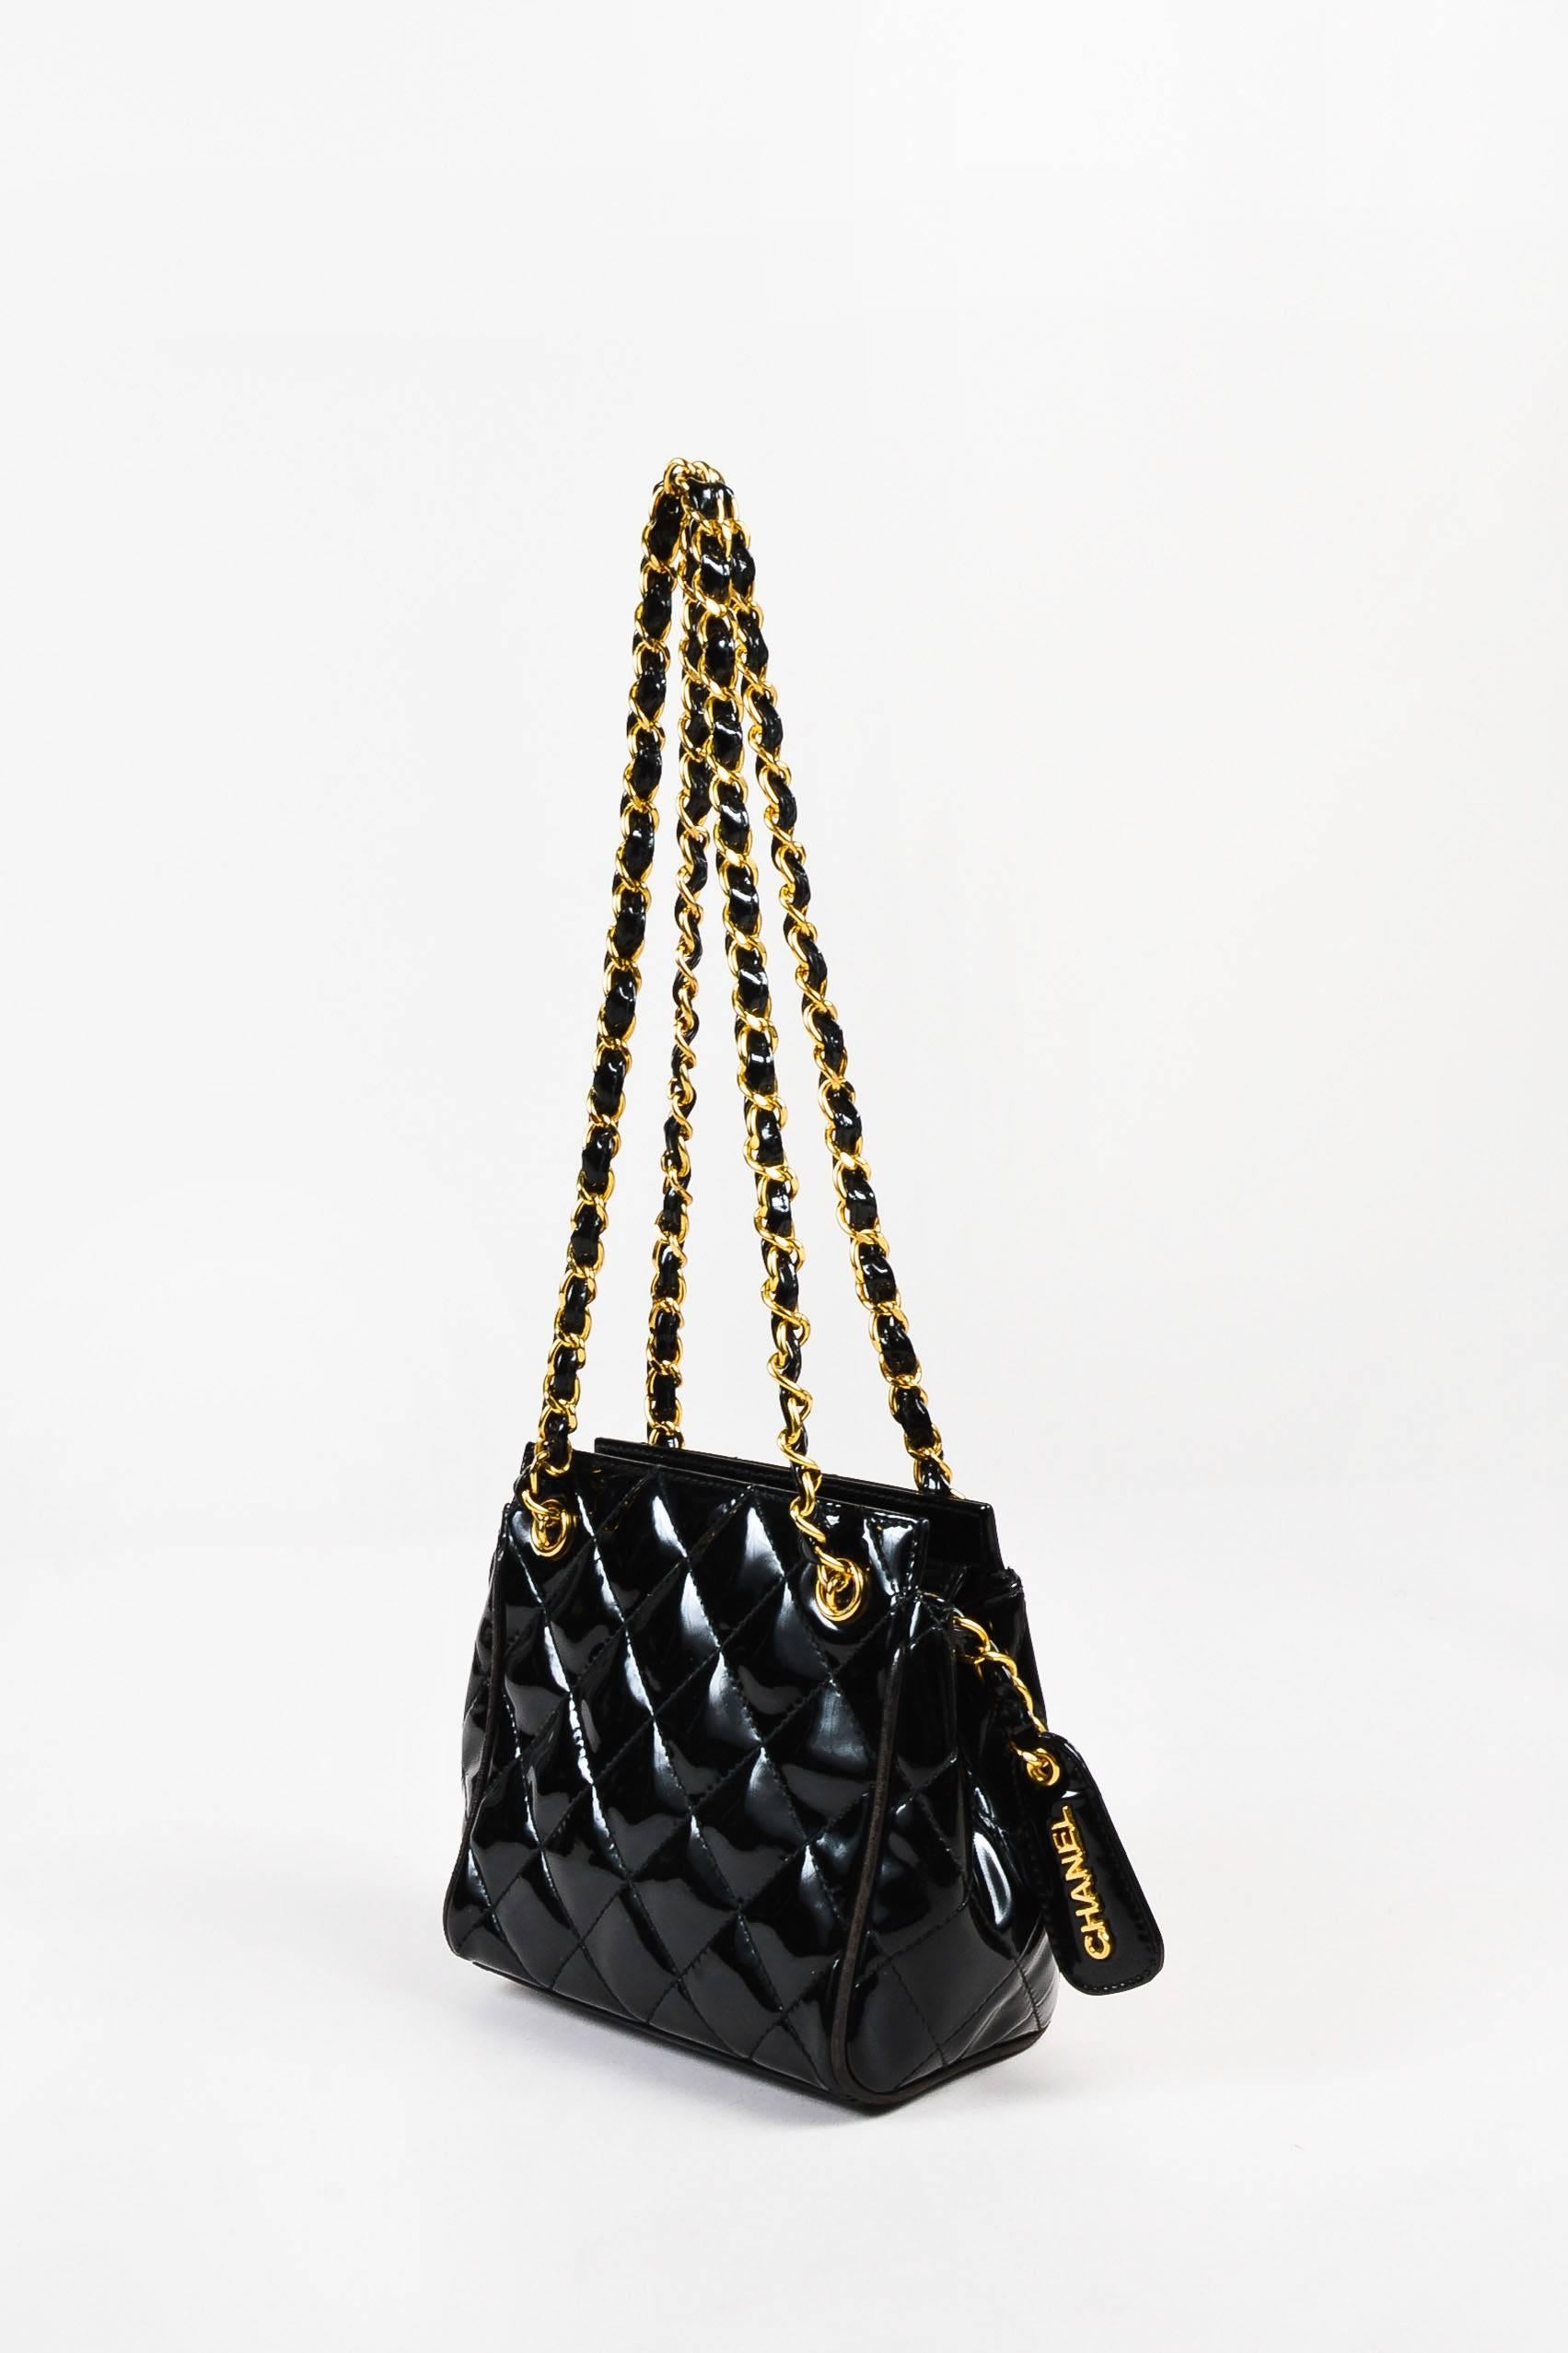 Vintage patent shoulder bag by Chanel designed with the brand's signature quilted stitch pattern. This miniature classic features two gold-tone metal chain straps woven with patent leather trim and a 